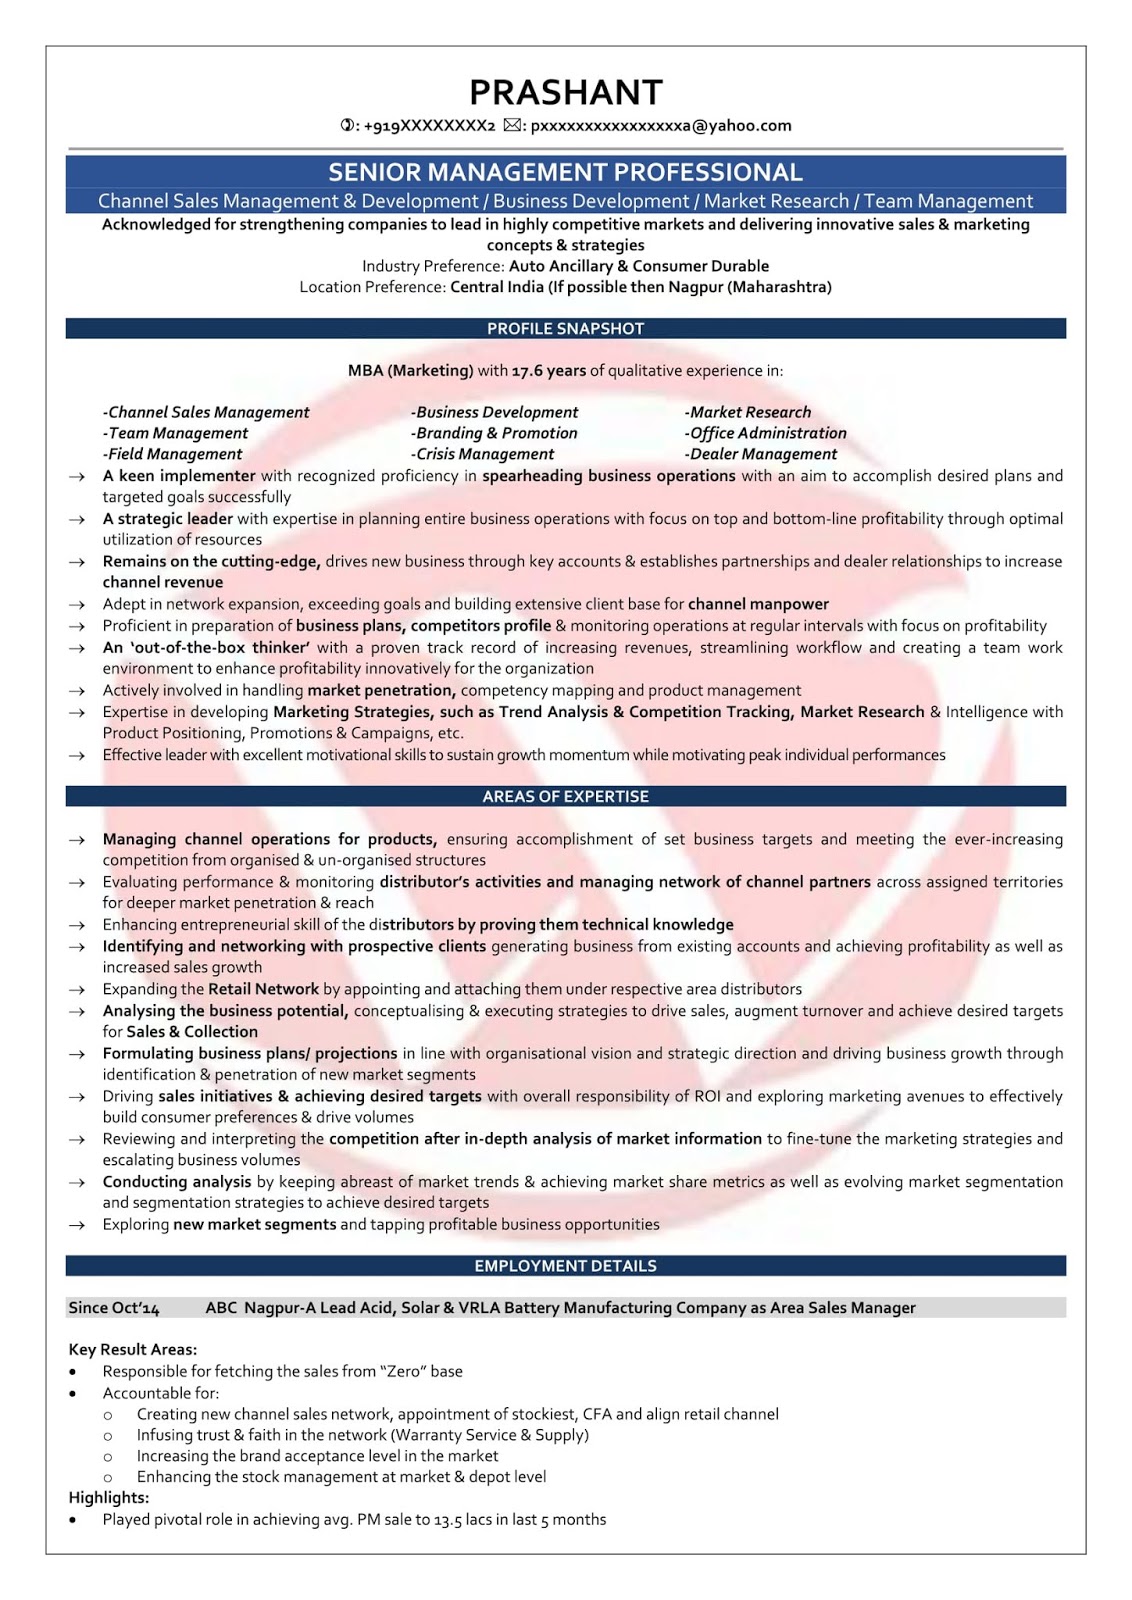 sales manager resume examples, sales manager resume examples 2020, sales manager resume examples 2019, sales manager resume examples 2018, sales manager resume examples 2017, sales manager resume examples australia, sales manager sample resume,